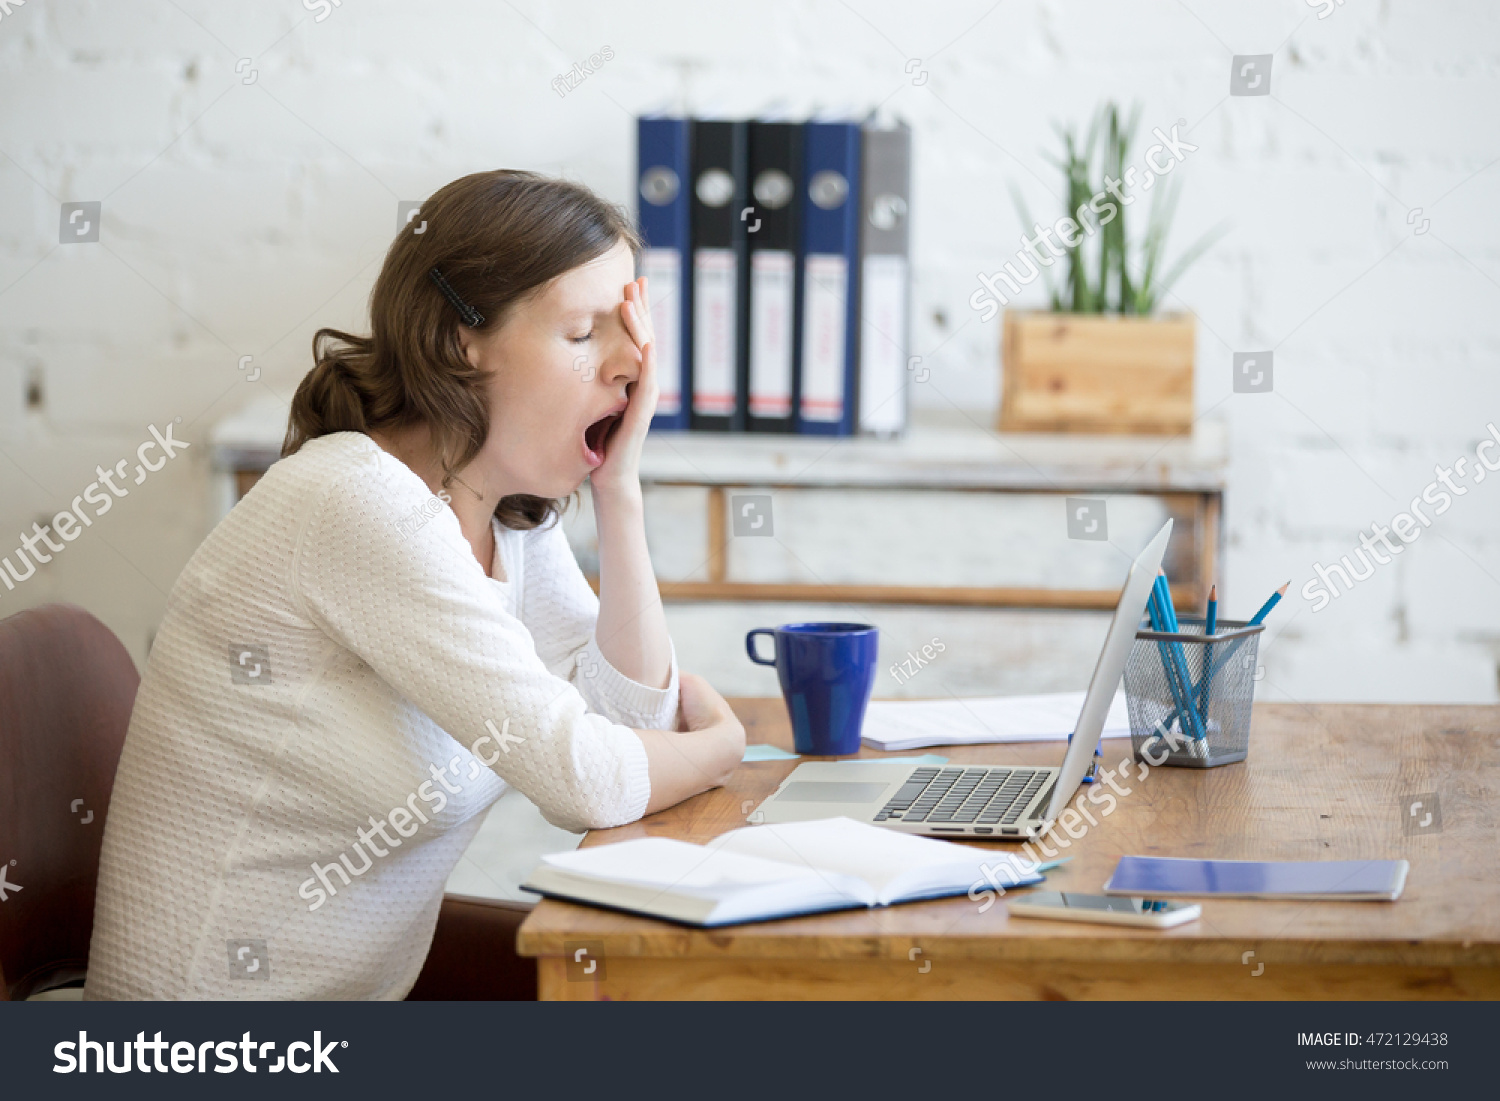 Portrait of young woman sitting at table in front of laptop, sleepy, tired, overworked, lazy to work. Attractive business woman yawning in home office relaxing or bored after work on laptop computer #472129438